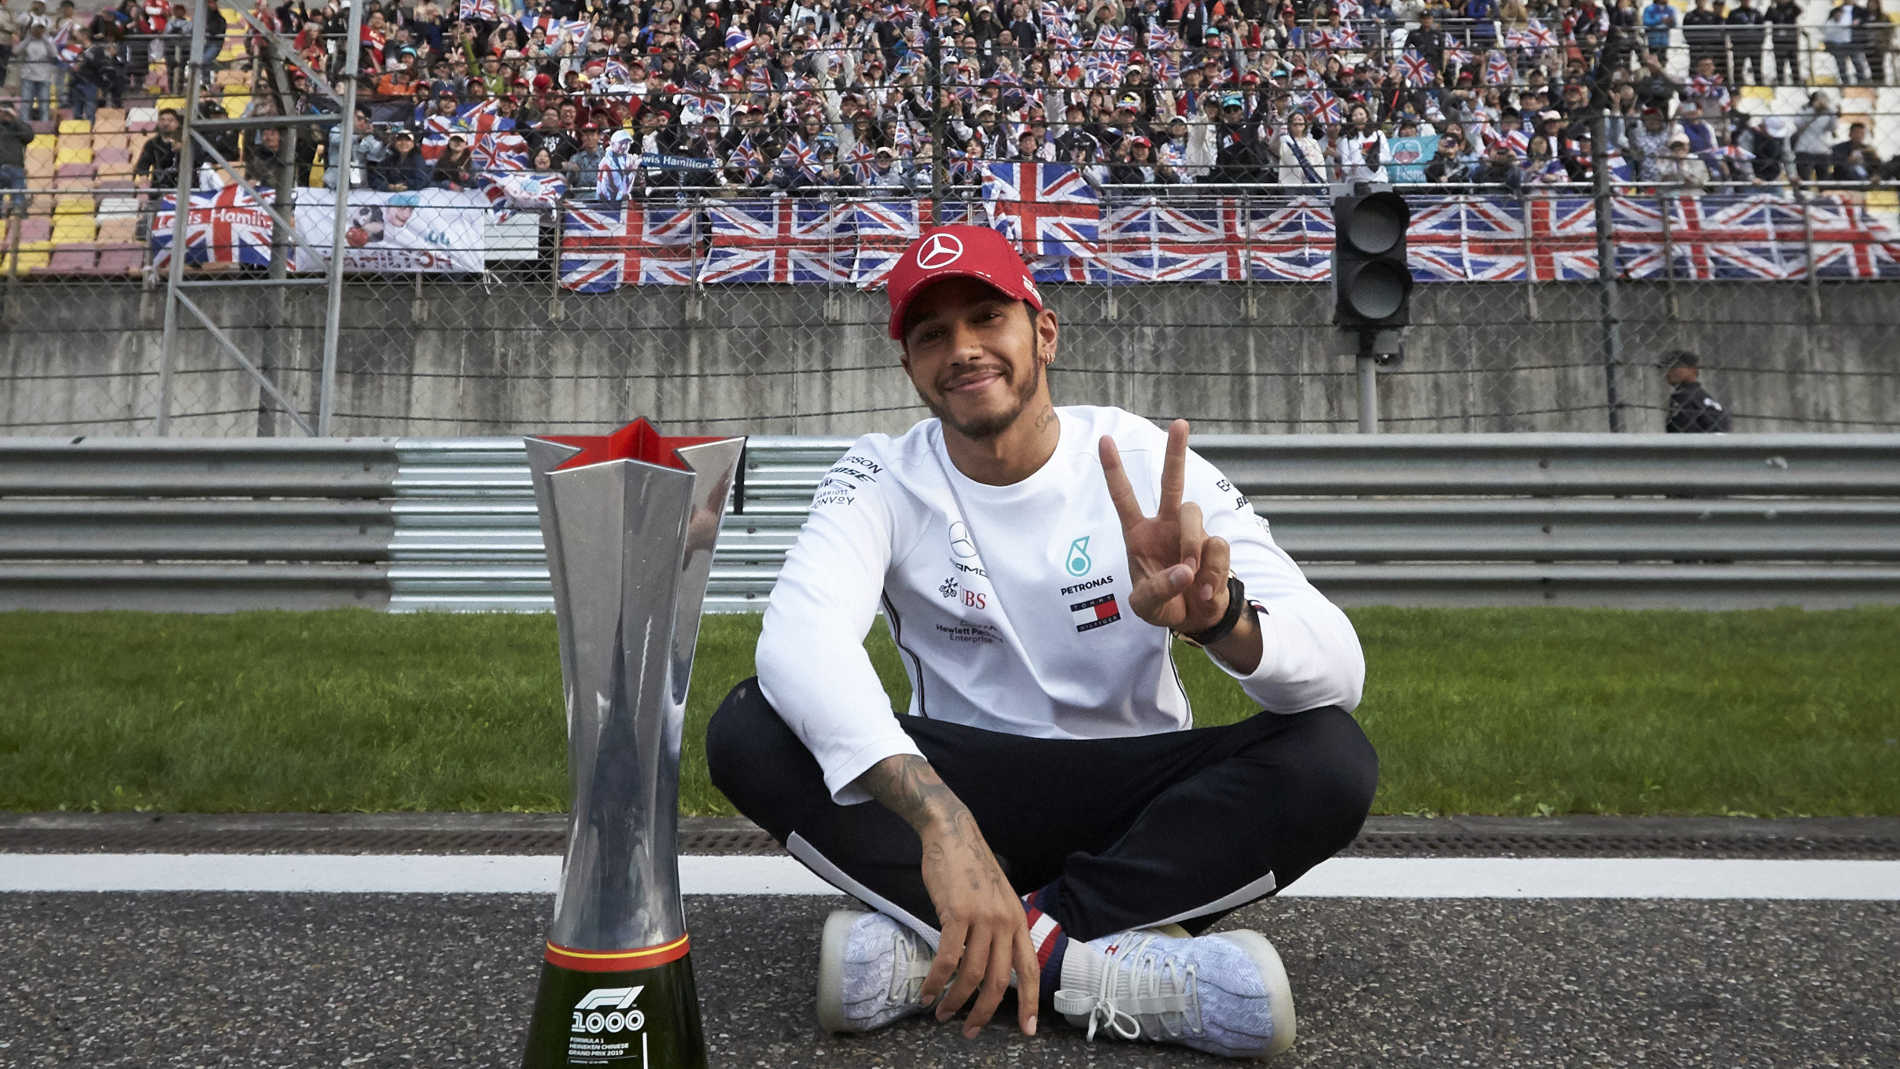 Sophie punch bench The Winners and Losers of the 2019 Chinese Grand Prix | Formula 1®